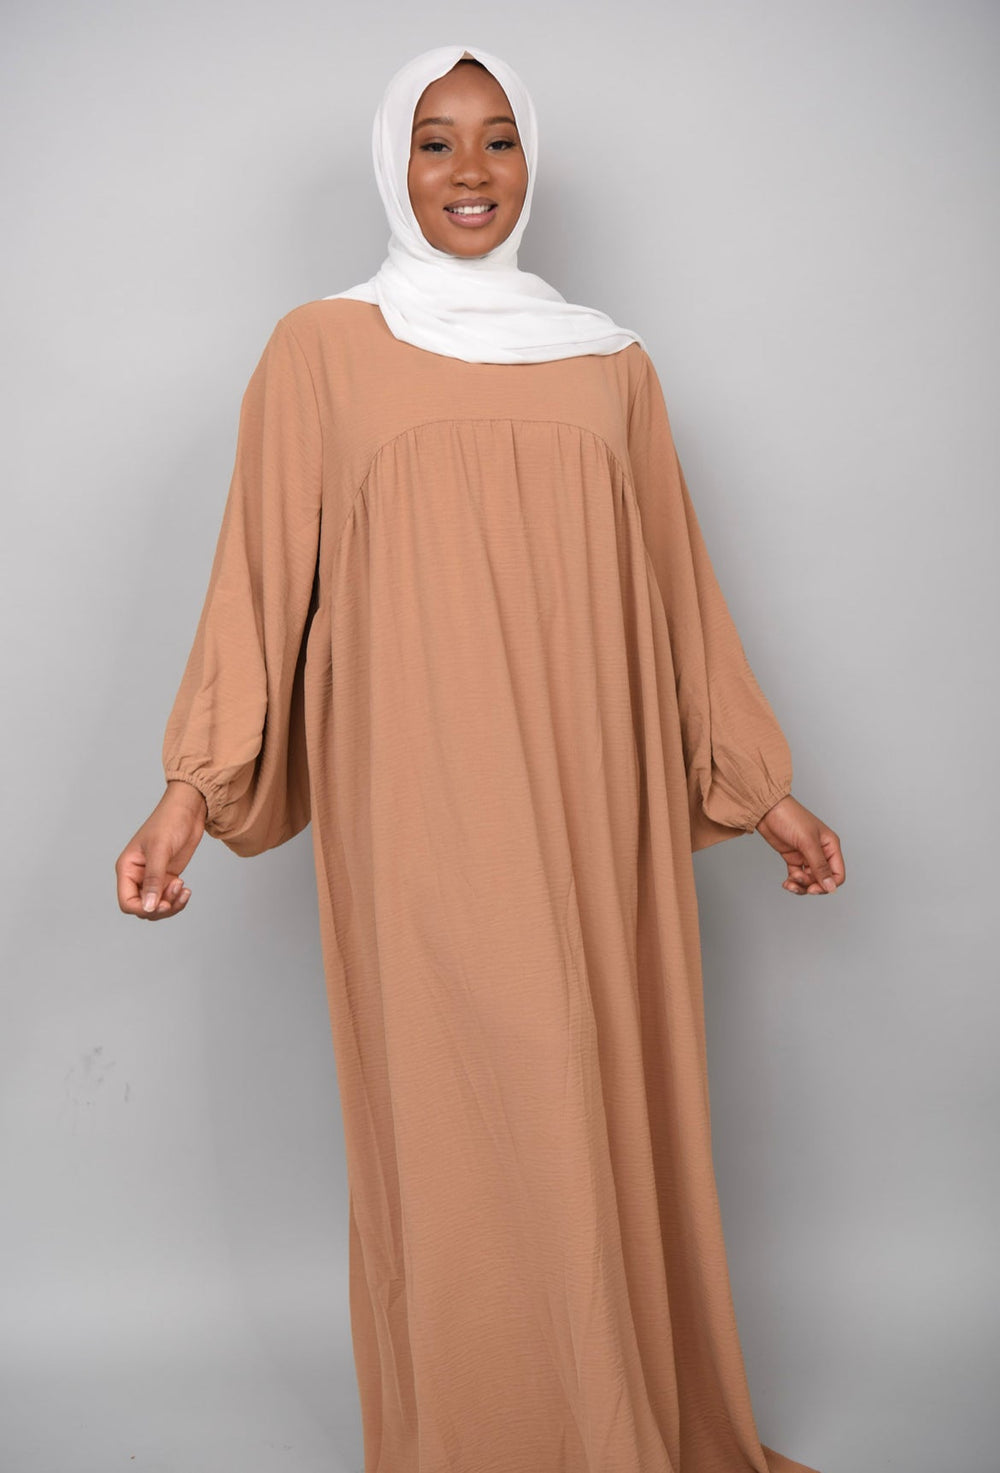 Get trendy with Amelia Textured Abaya - Camel -  available at Voilee NY. Grab yours for $54.90 today!